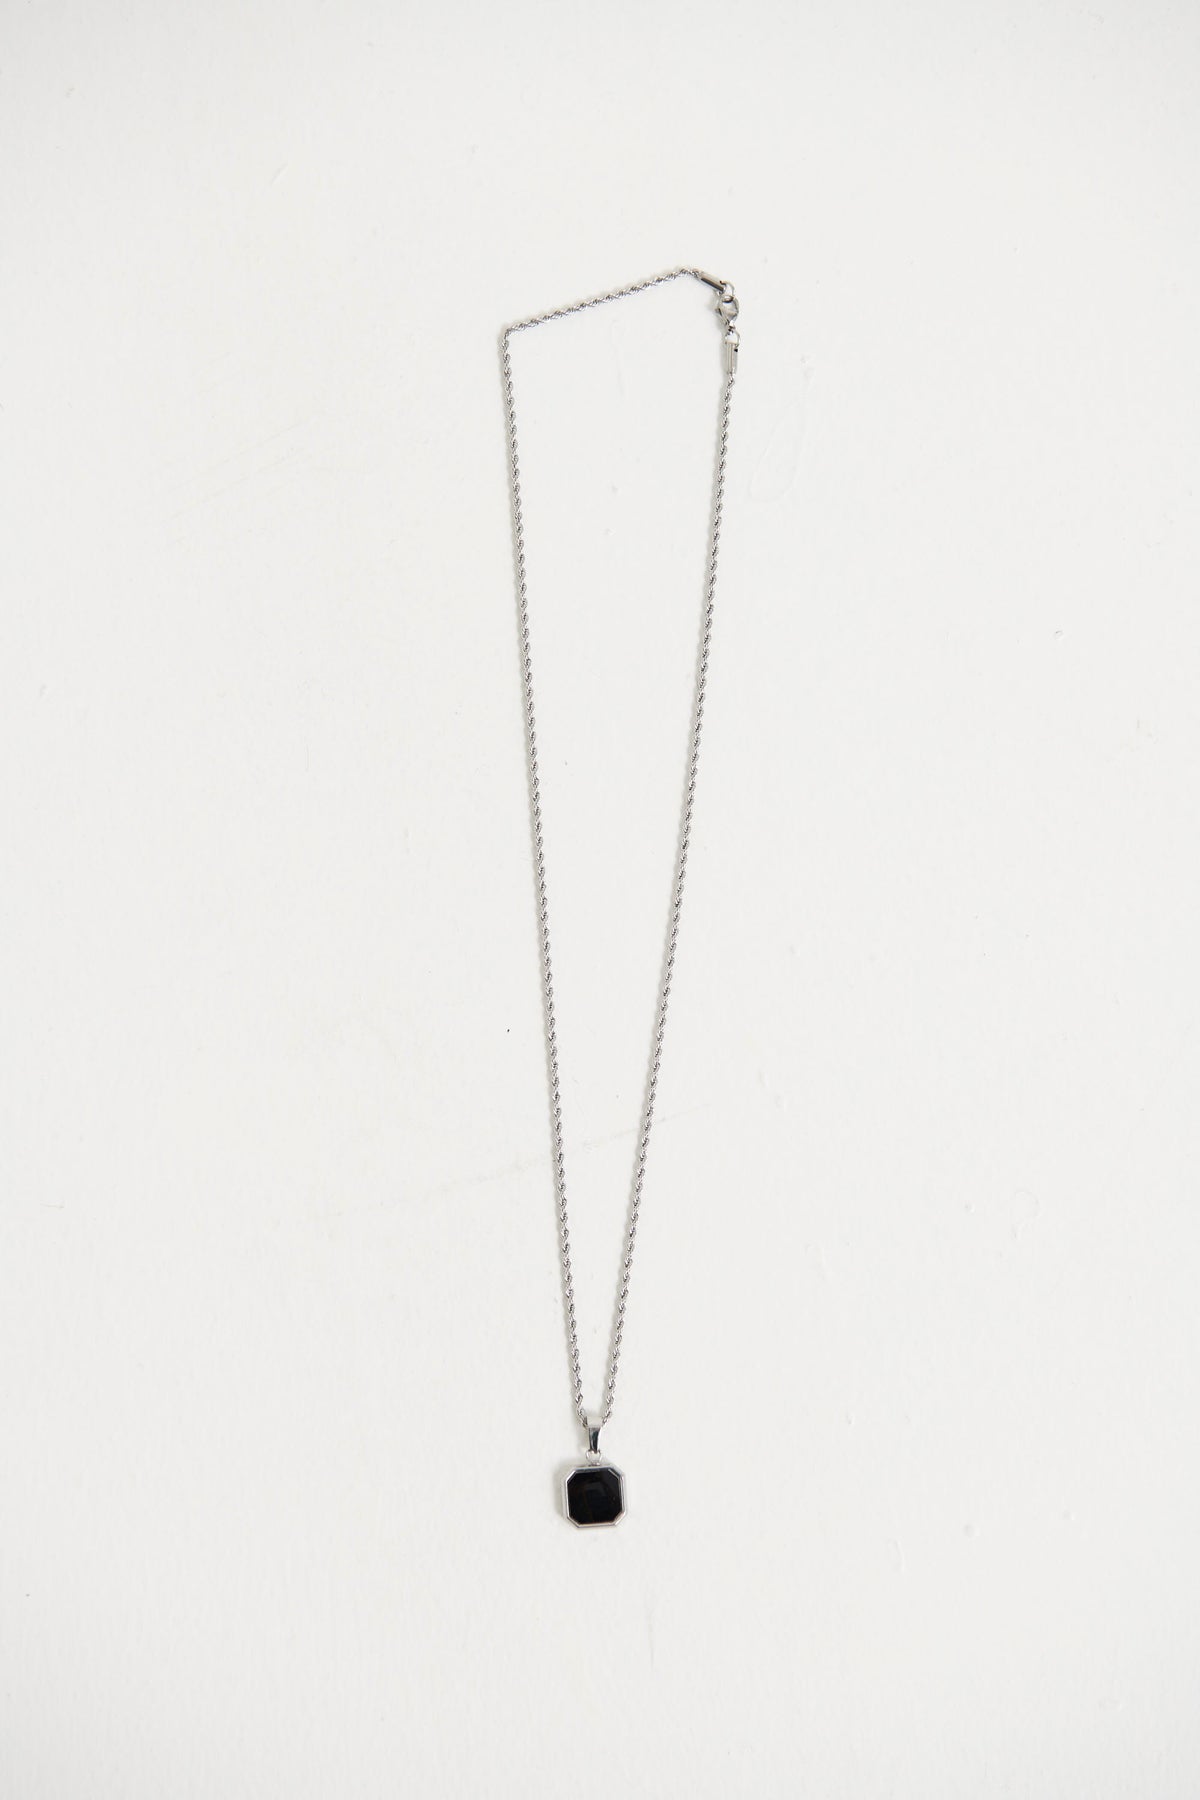 NTH Octagon Pendant Necklace Silver